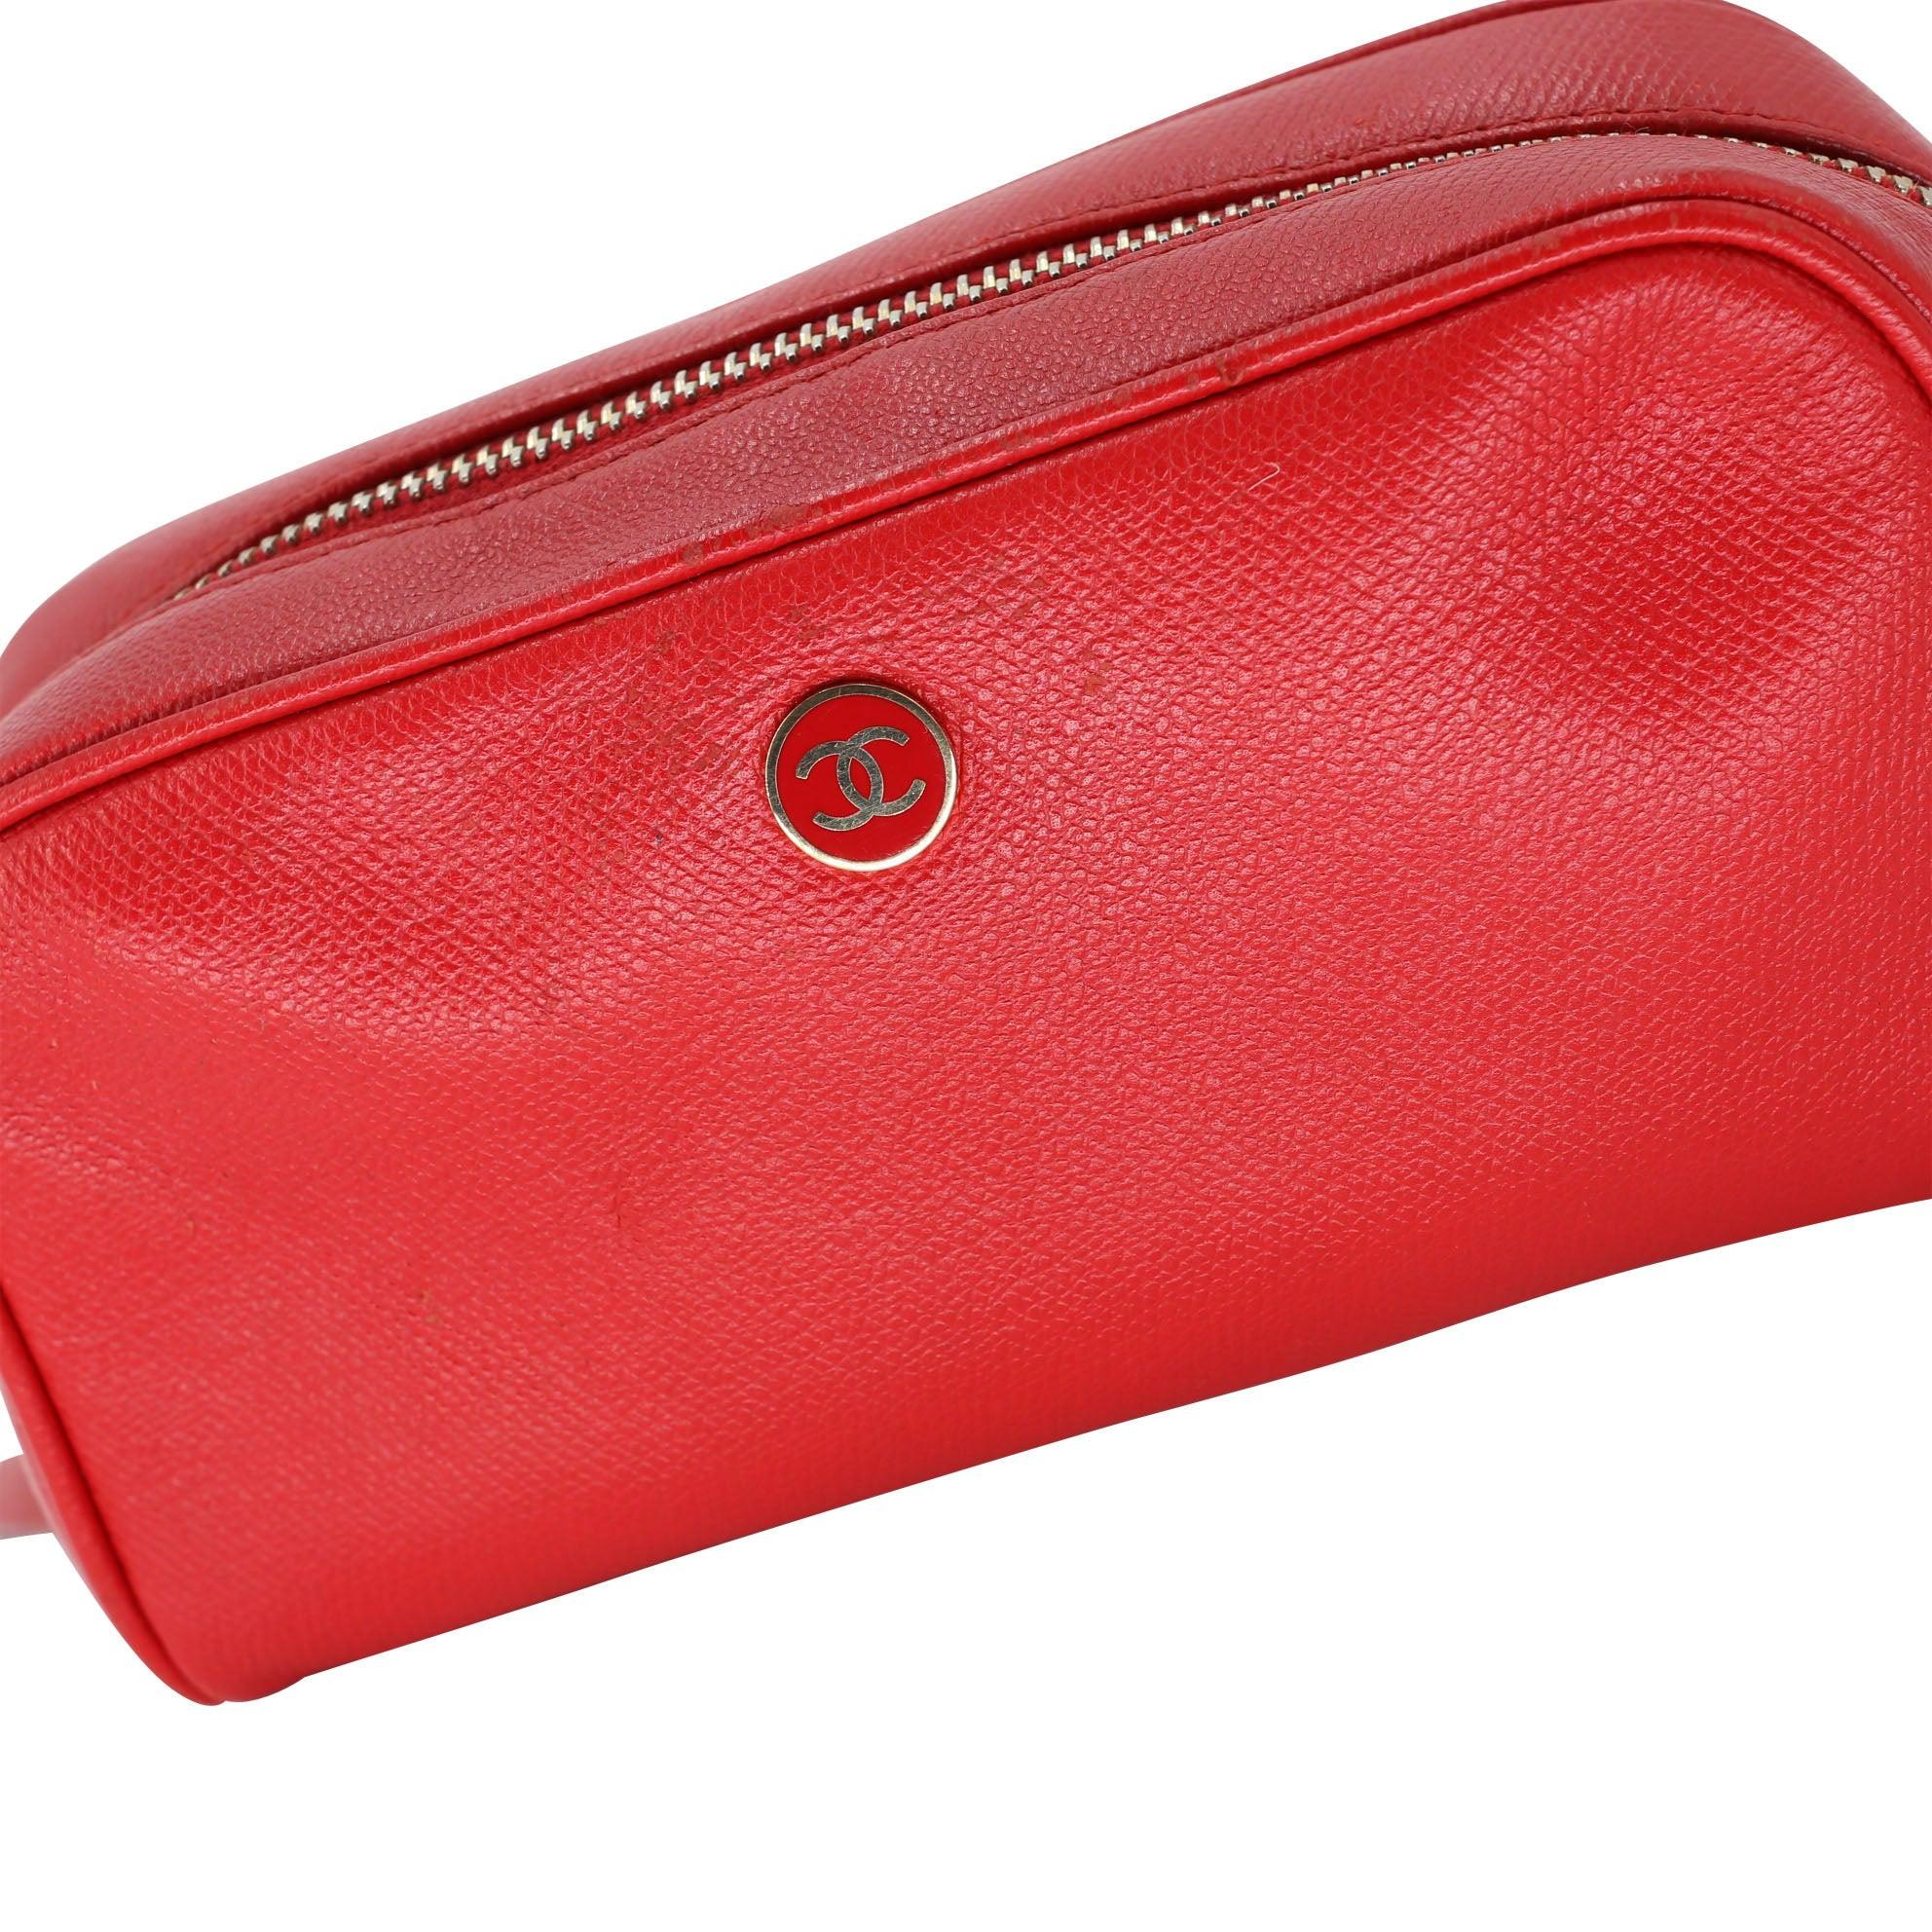 Chanel Coco Button Red Caviar Make Up Travel Bag CC-W1101P-A004 In Good Condition For Sale In Downey, CA